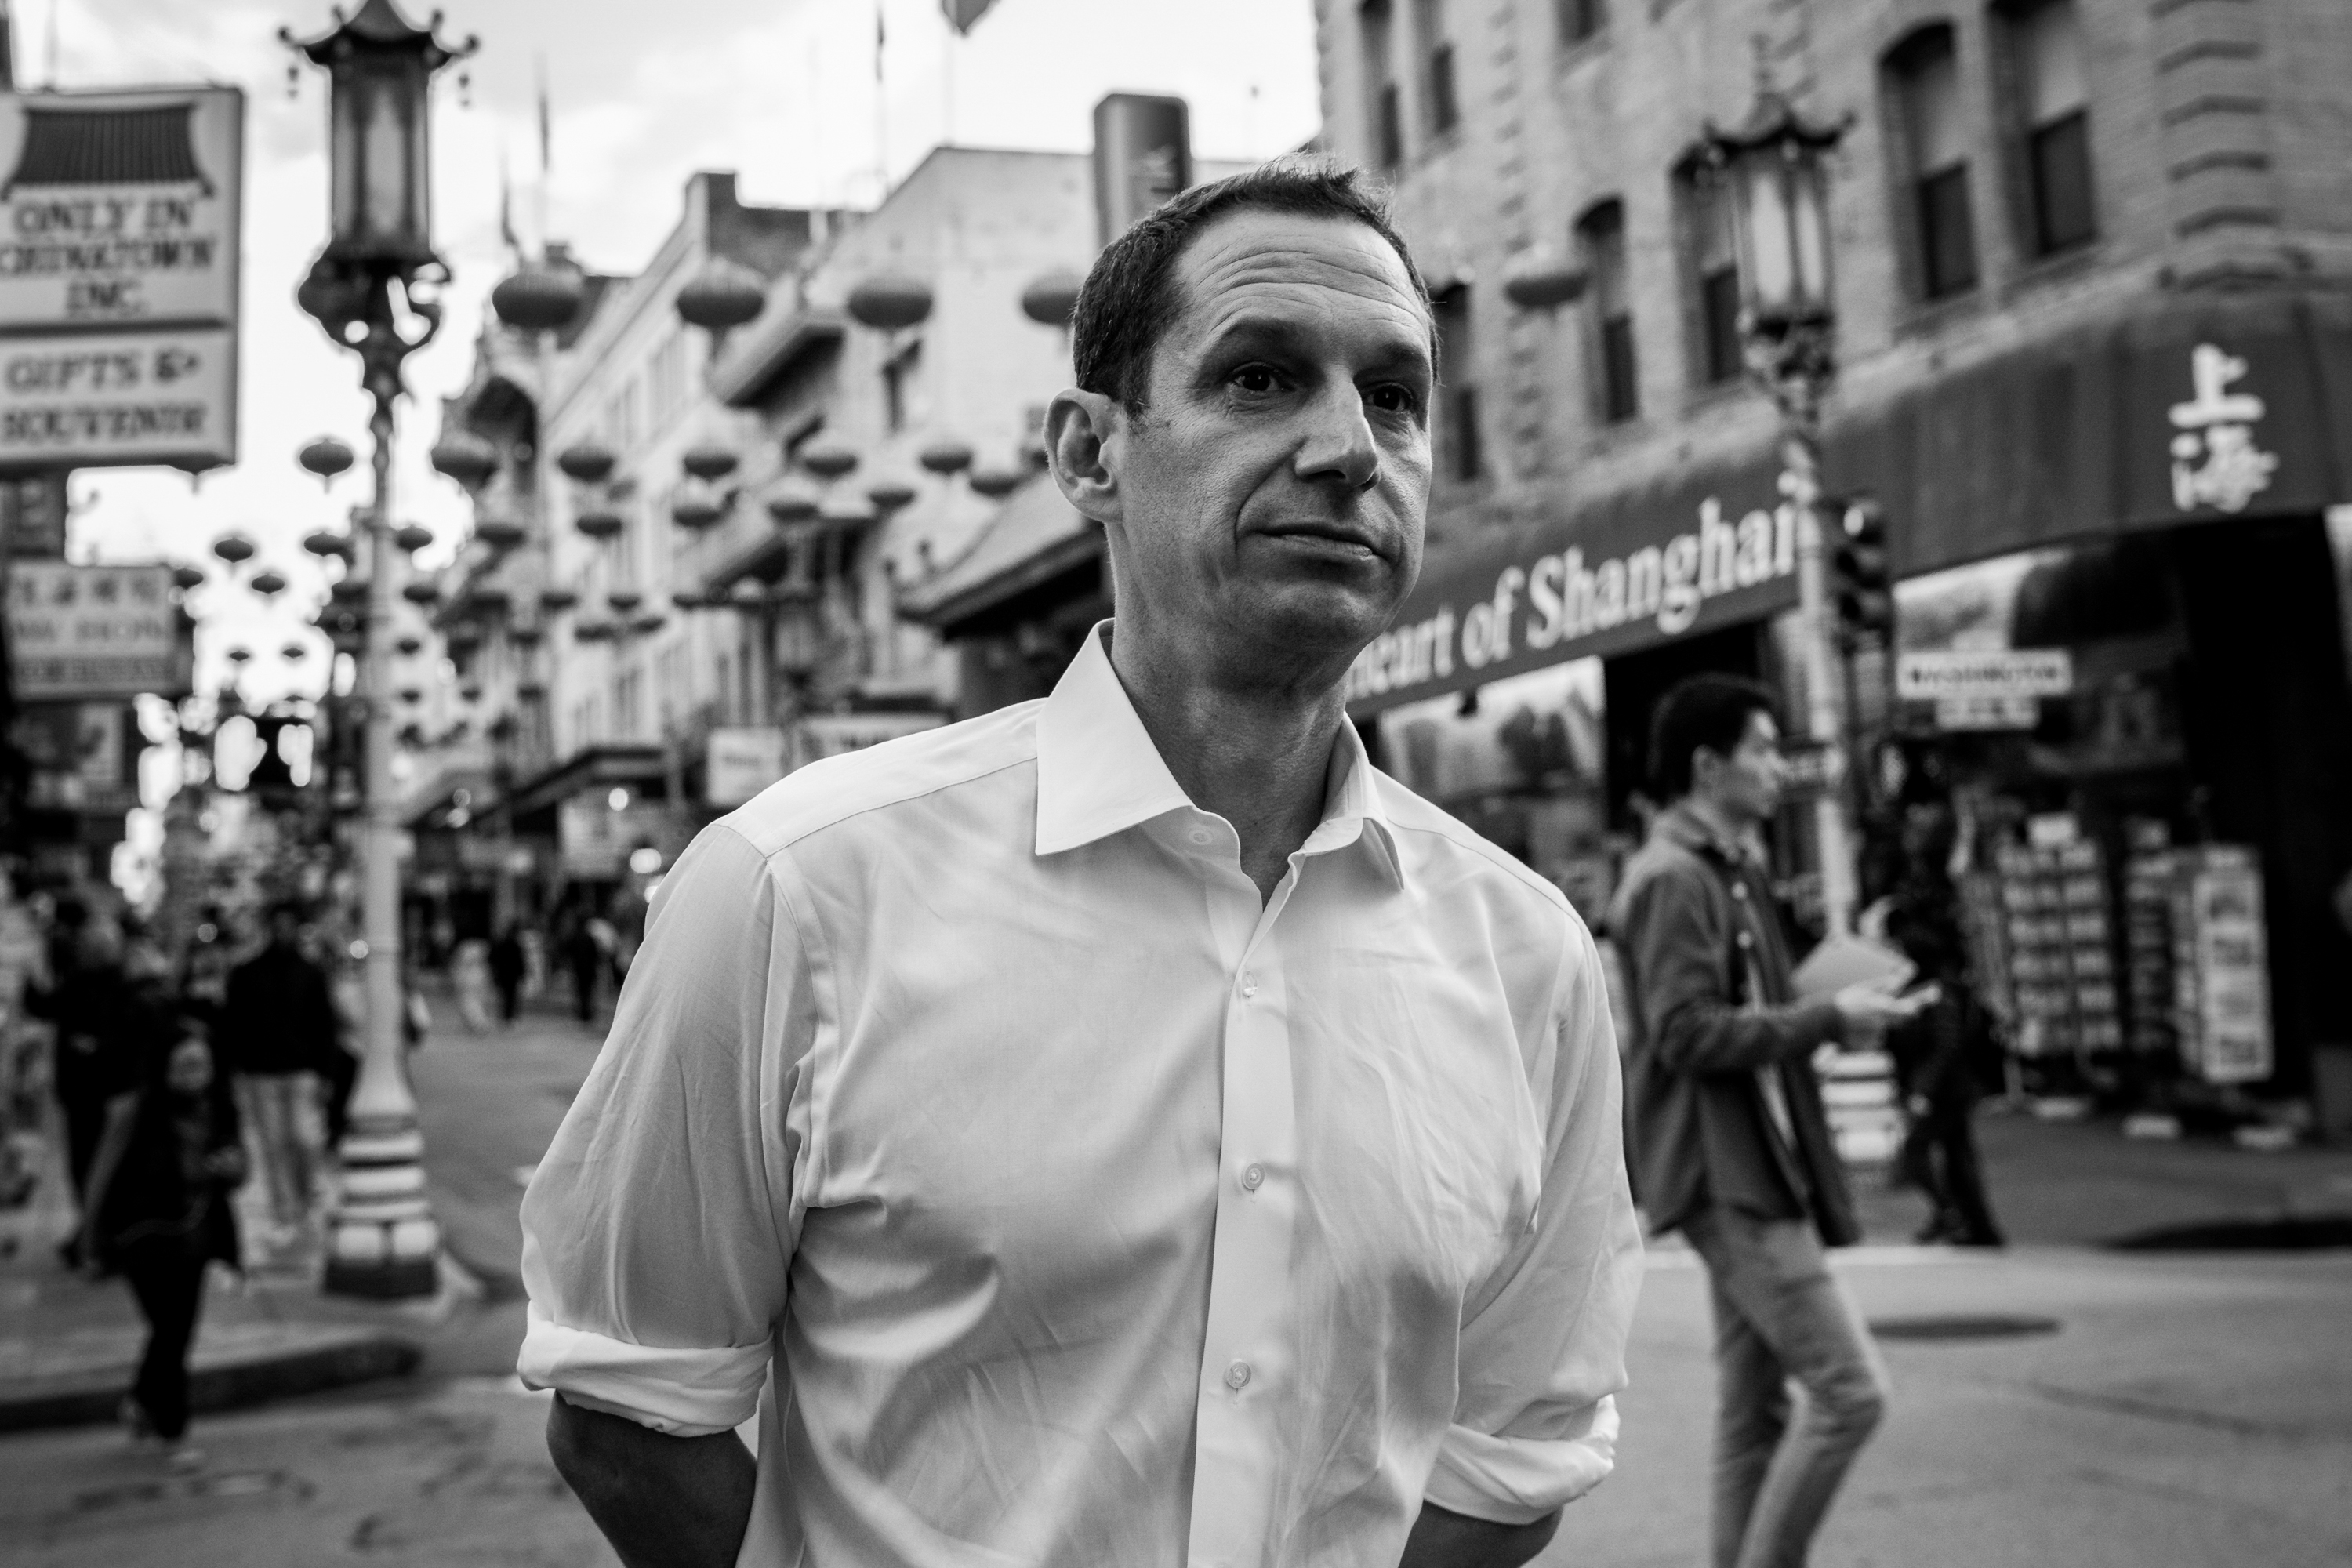 Mayoral Candidate Daniel Lurie in Chinatown